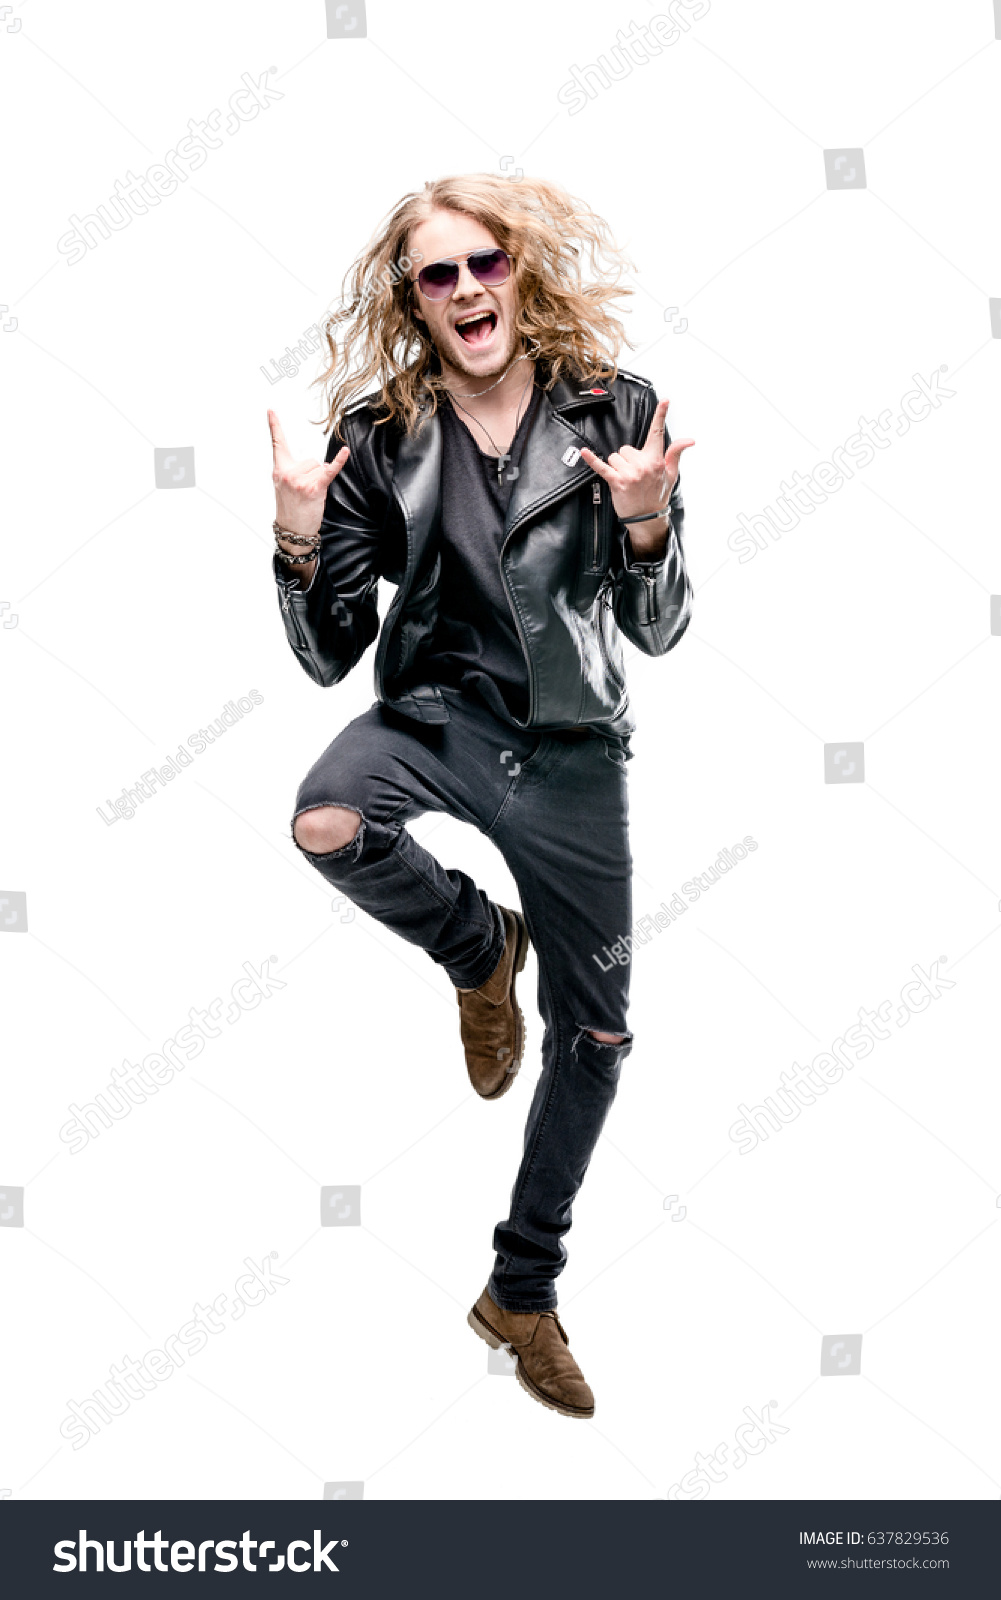 portrait of handsome rocker in black leather jacket and sunglasses showing rock signs isolated on white, rock star concept #637829536